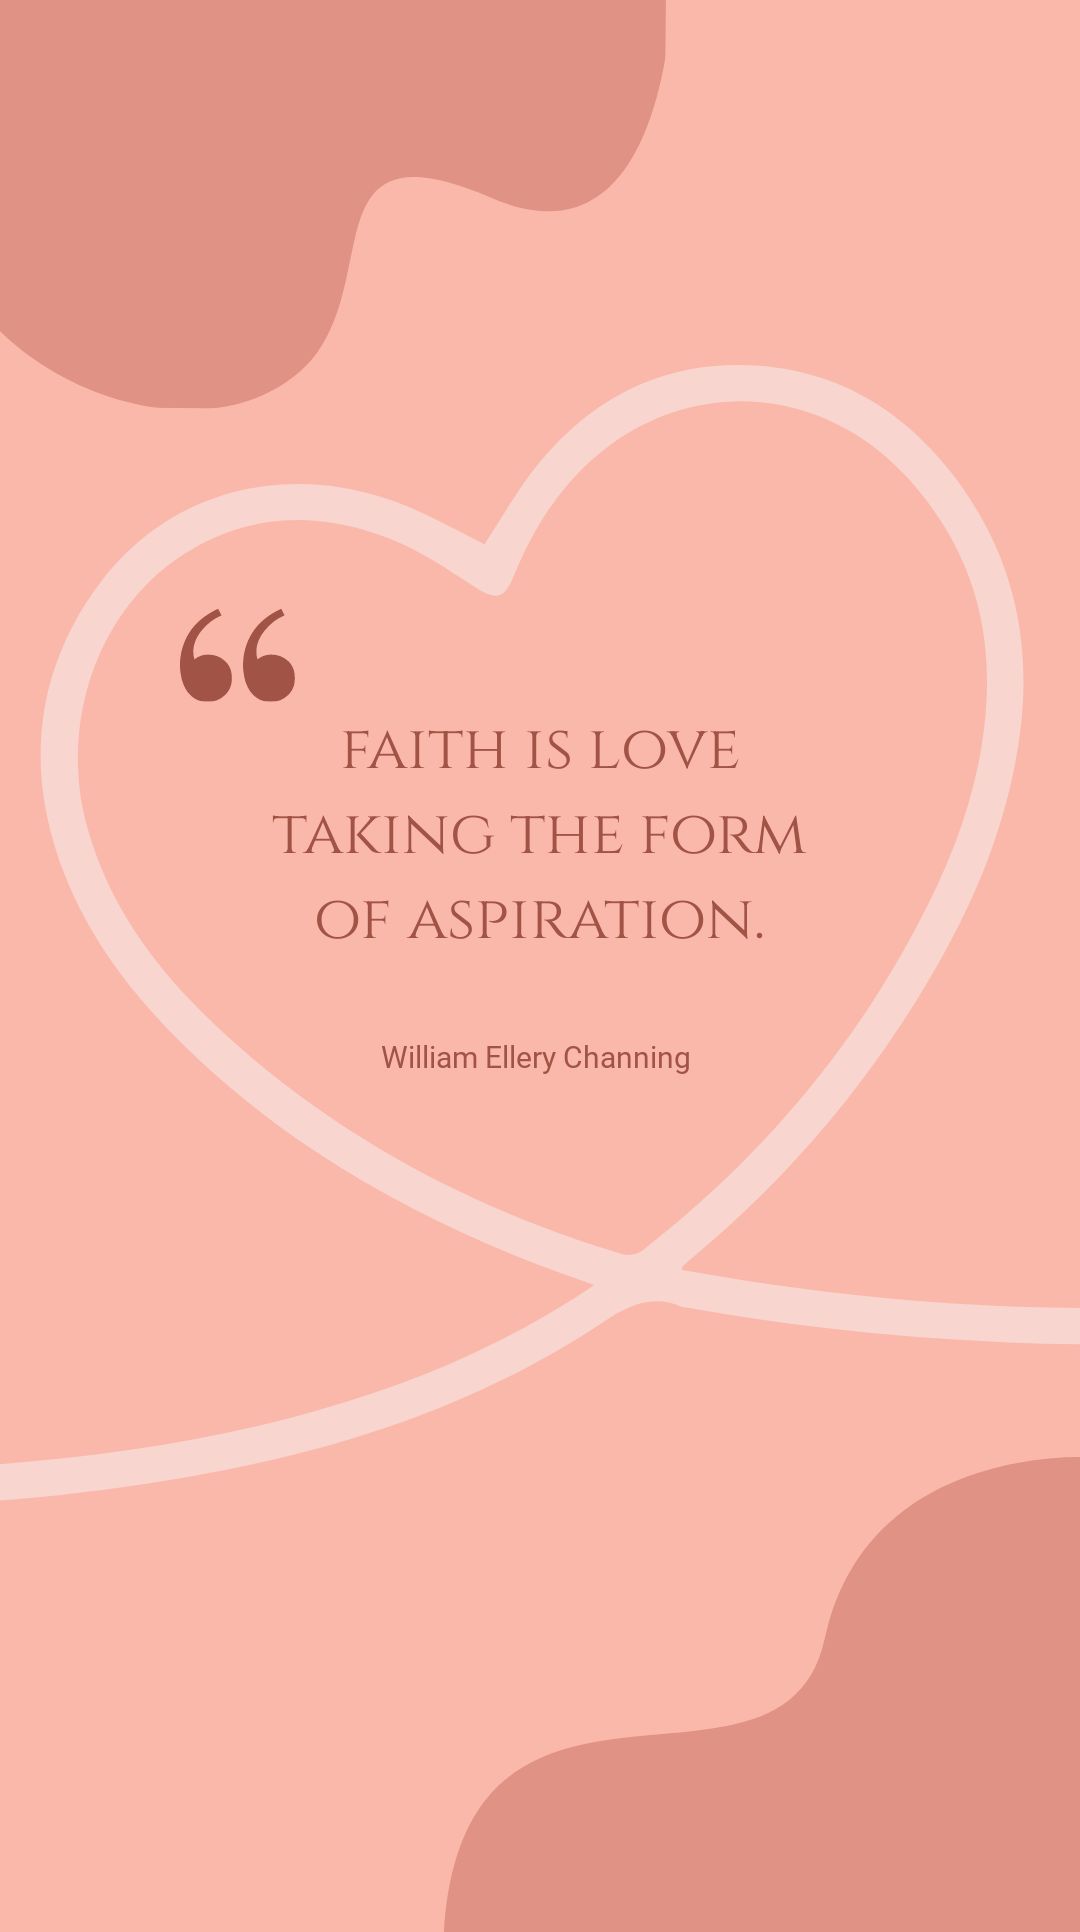 William Ellery Channing - Faith is love taking the form of aspiration.